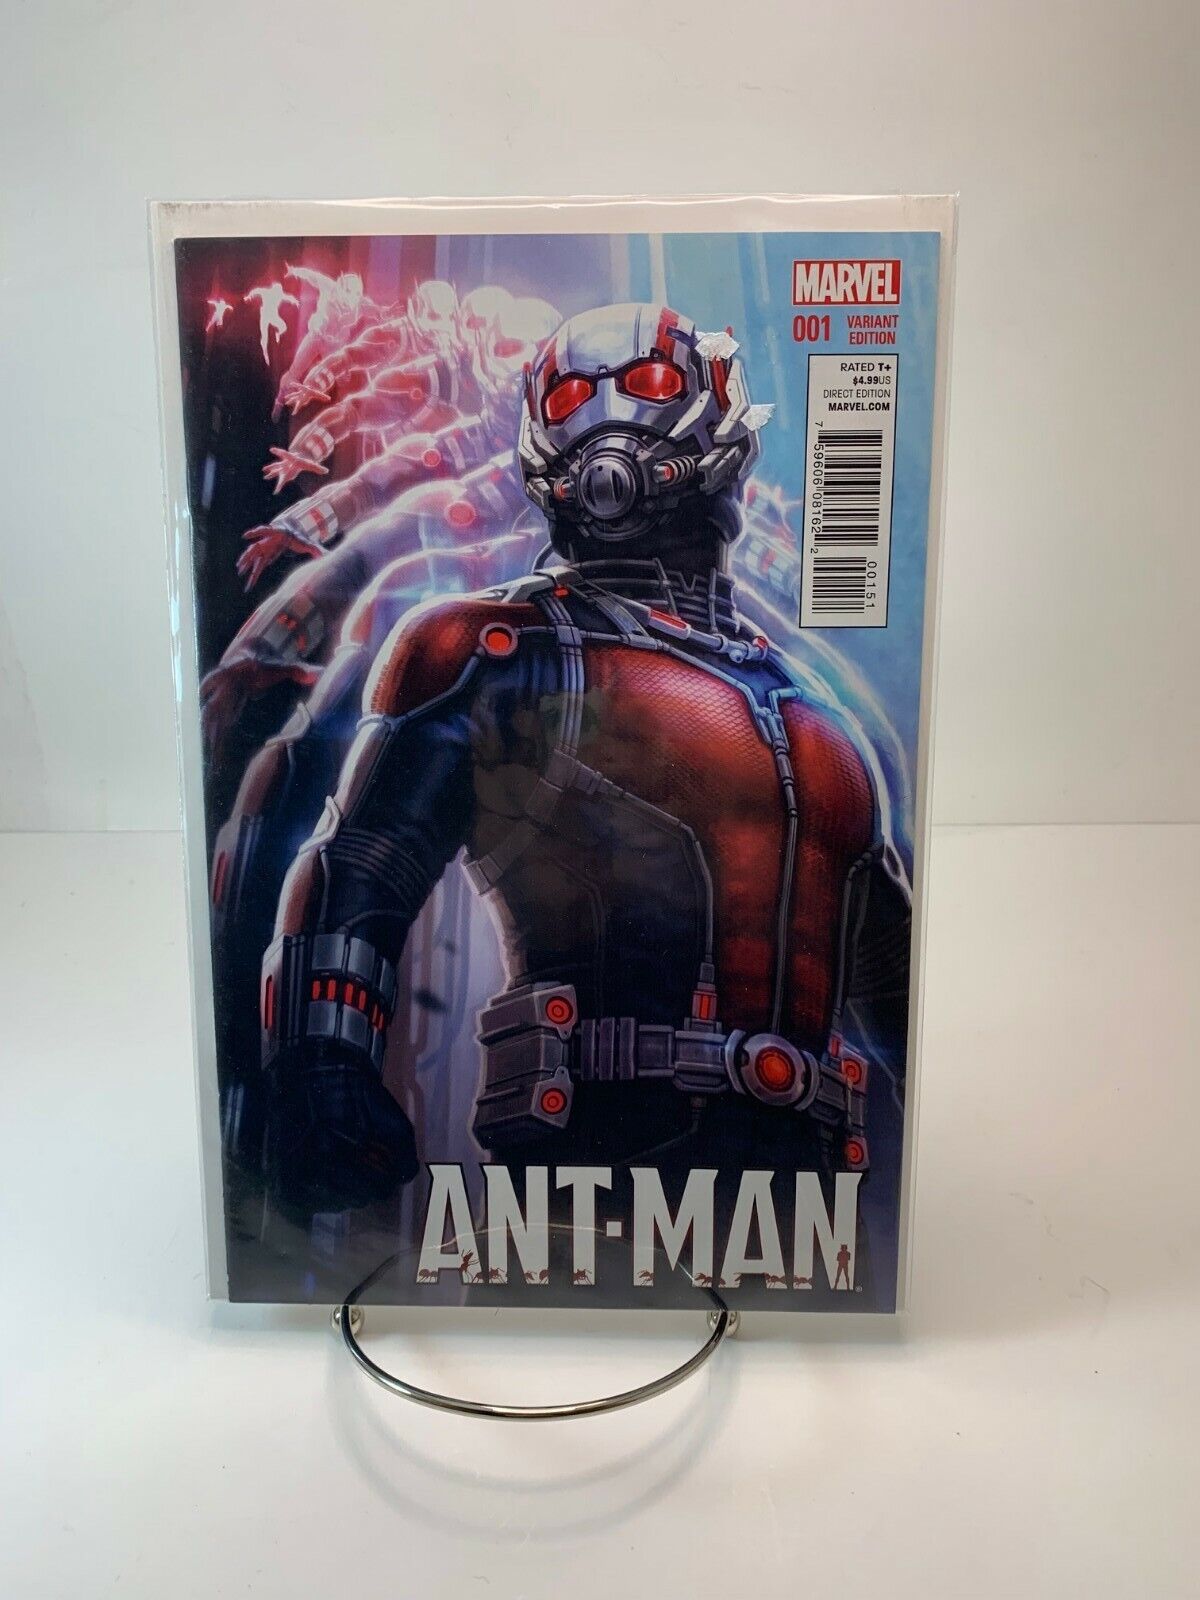 Ant-Man #1 1:15 Andy Park Movie Variant 2014 Marvel BRAND NEW UNREAD MINT